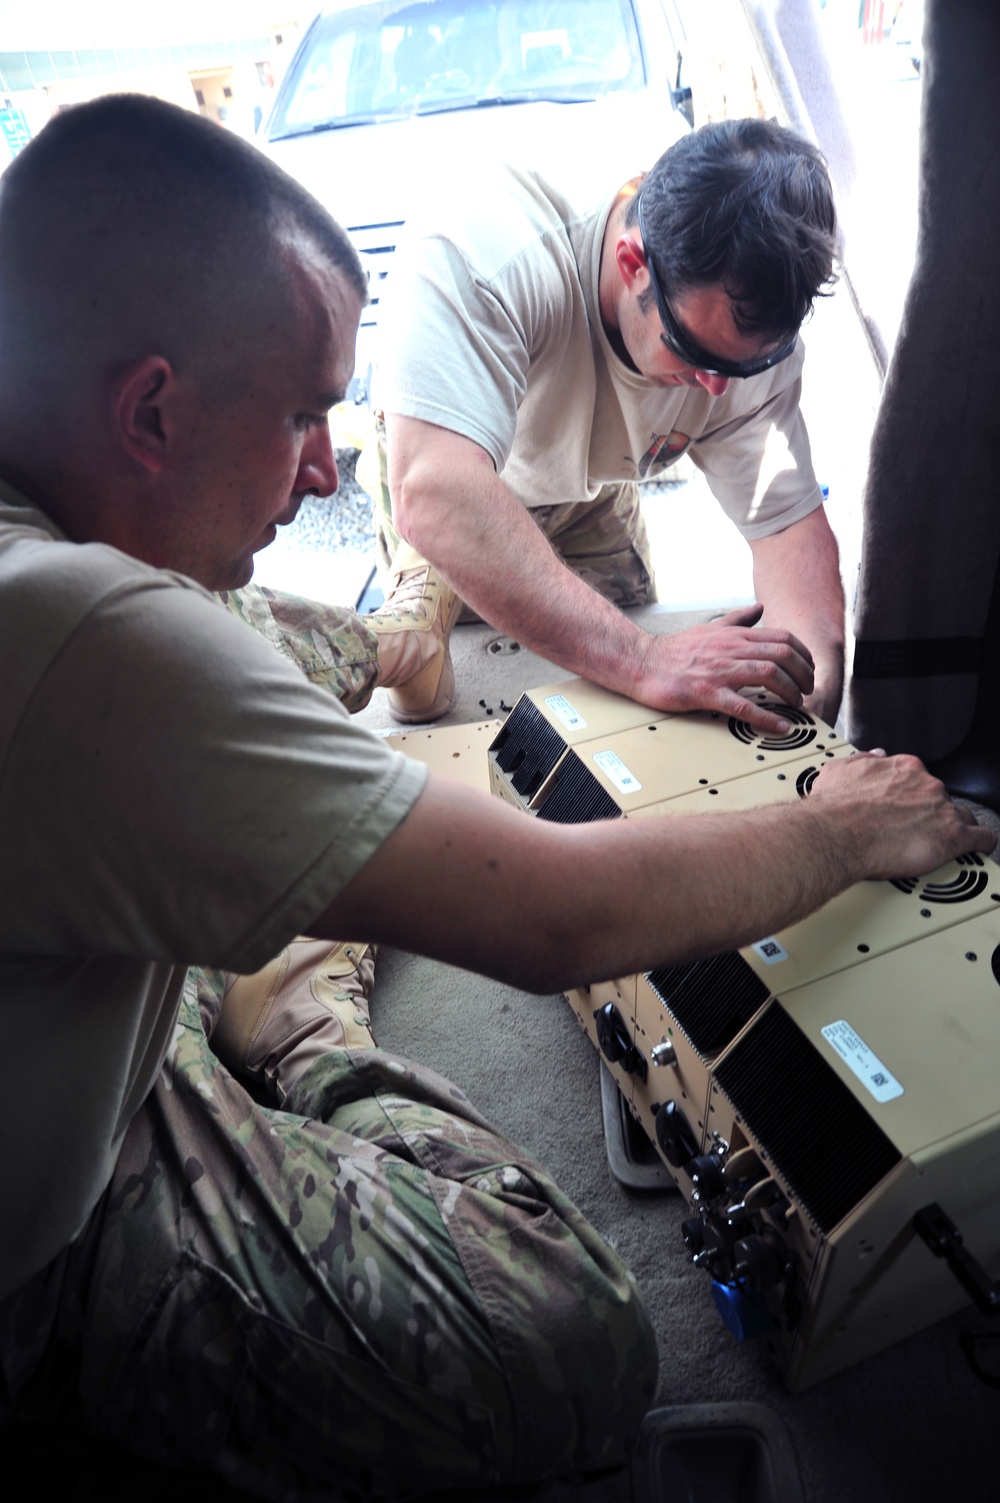 SOF electronic warfare soldier works to save lives on the modern battlefield